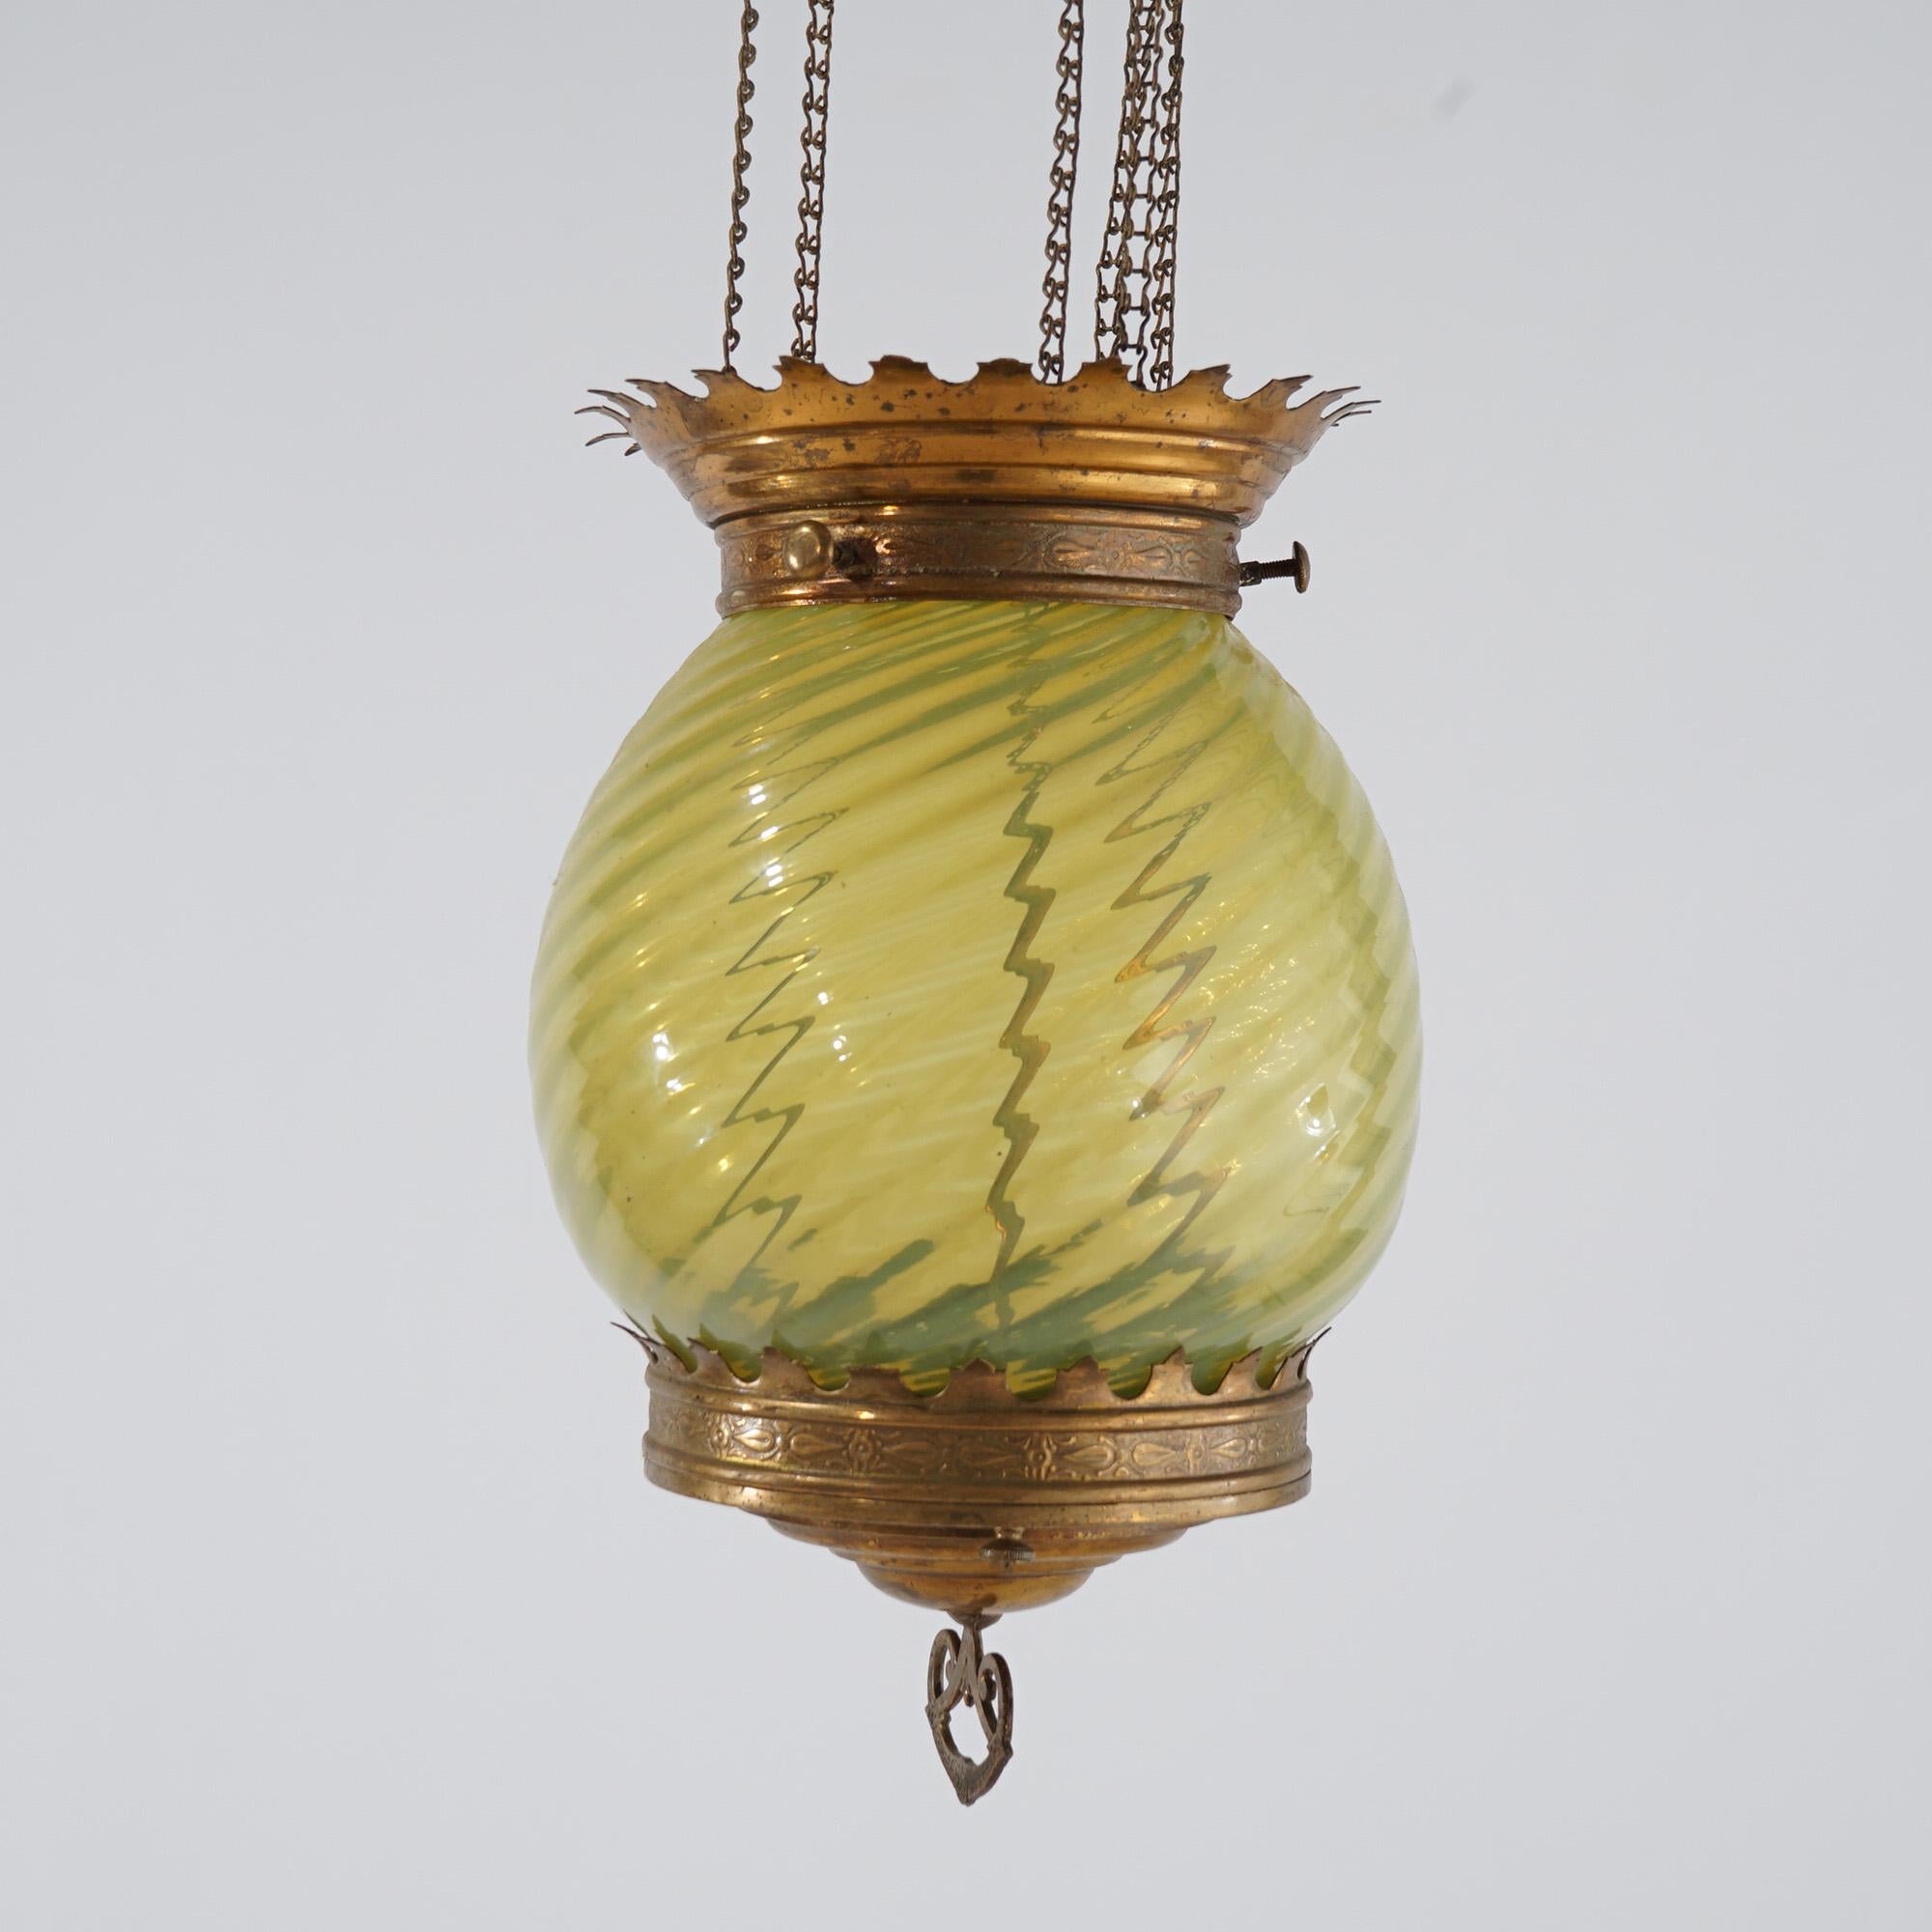 An antique Victorian hanging hall light offers brass frame with opalescent vaseline glass globe, c1880

Measures- 33.5''H x 7.75''W x 7.75''D